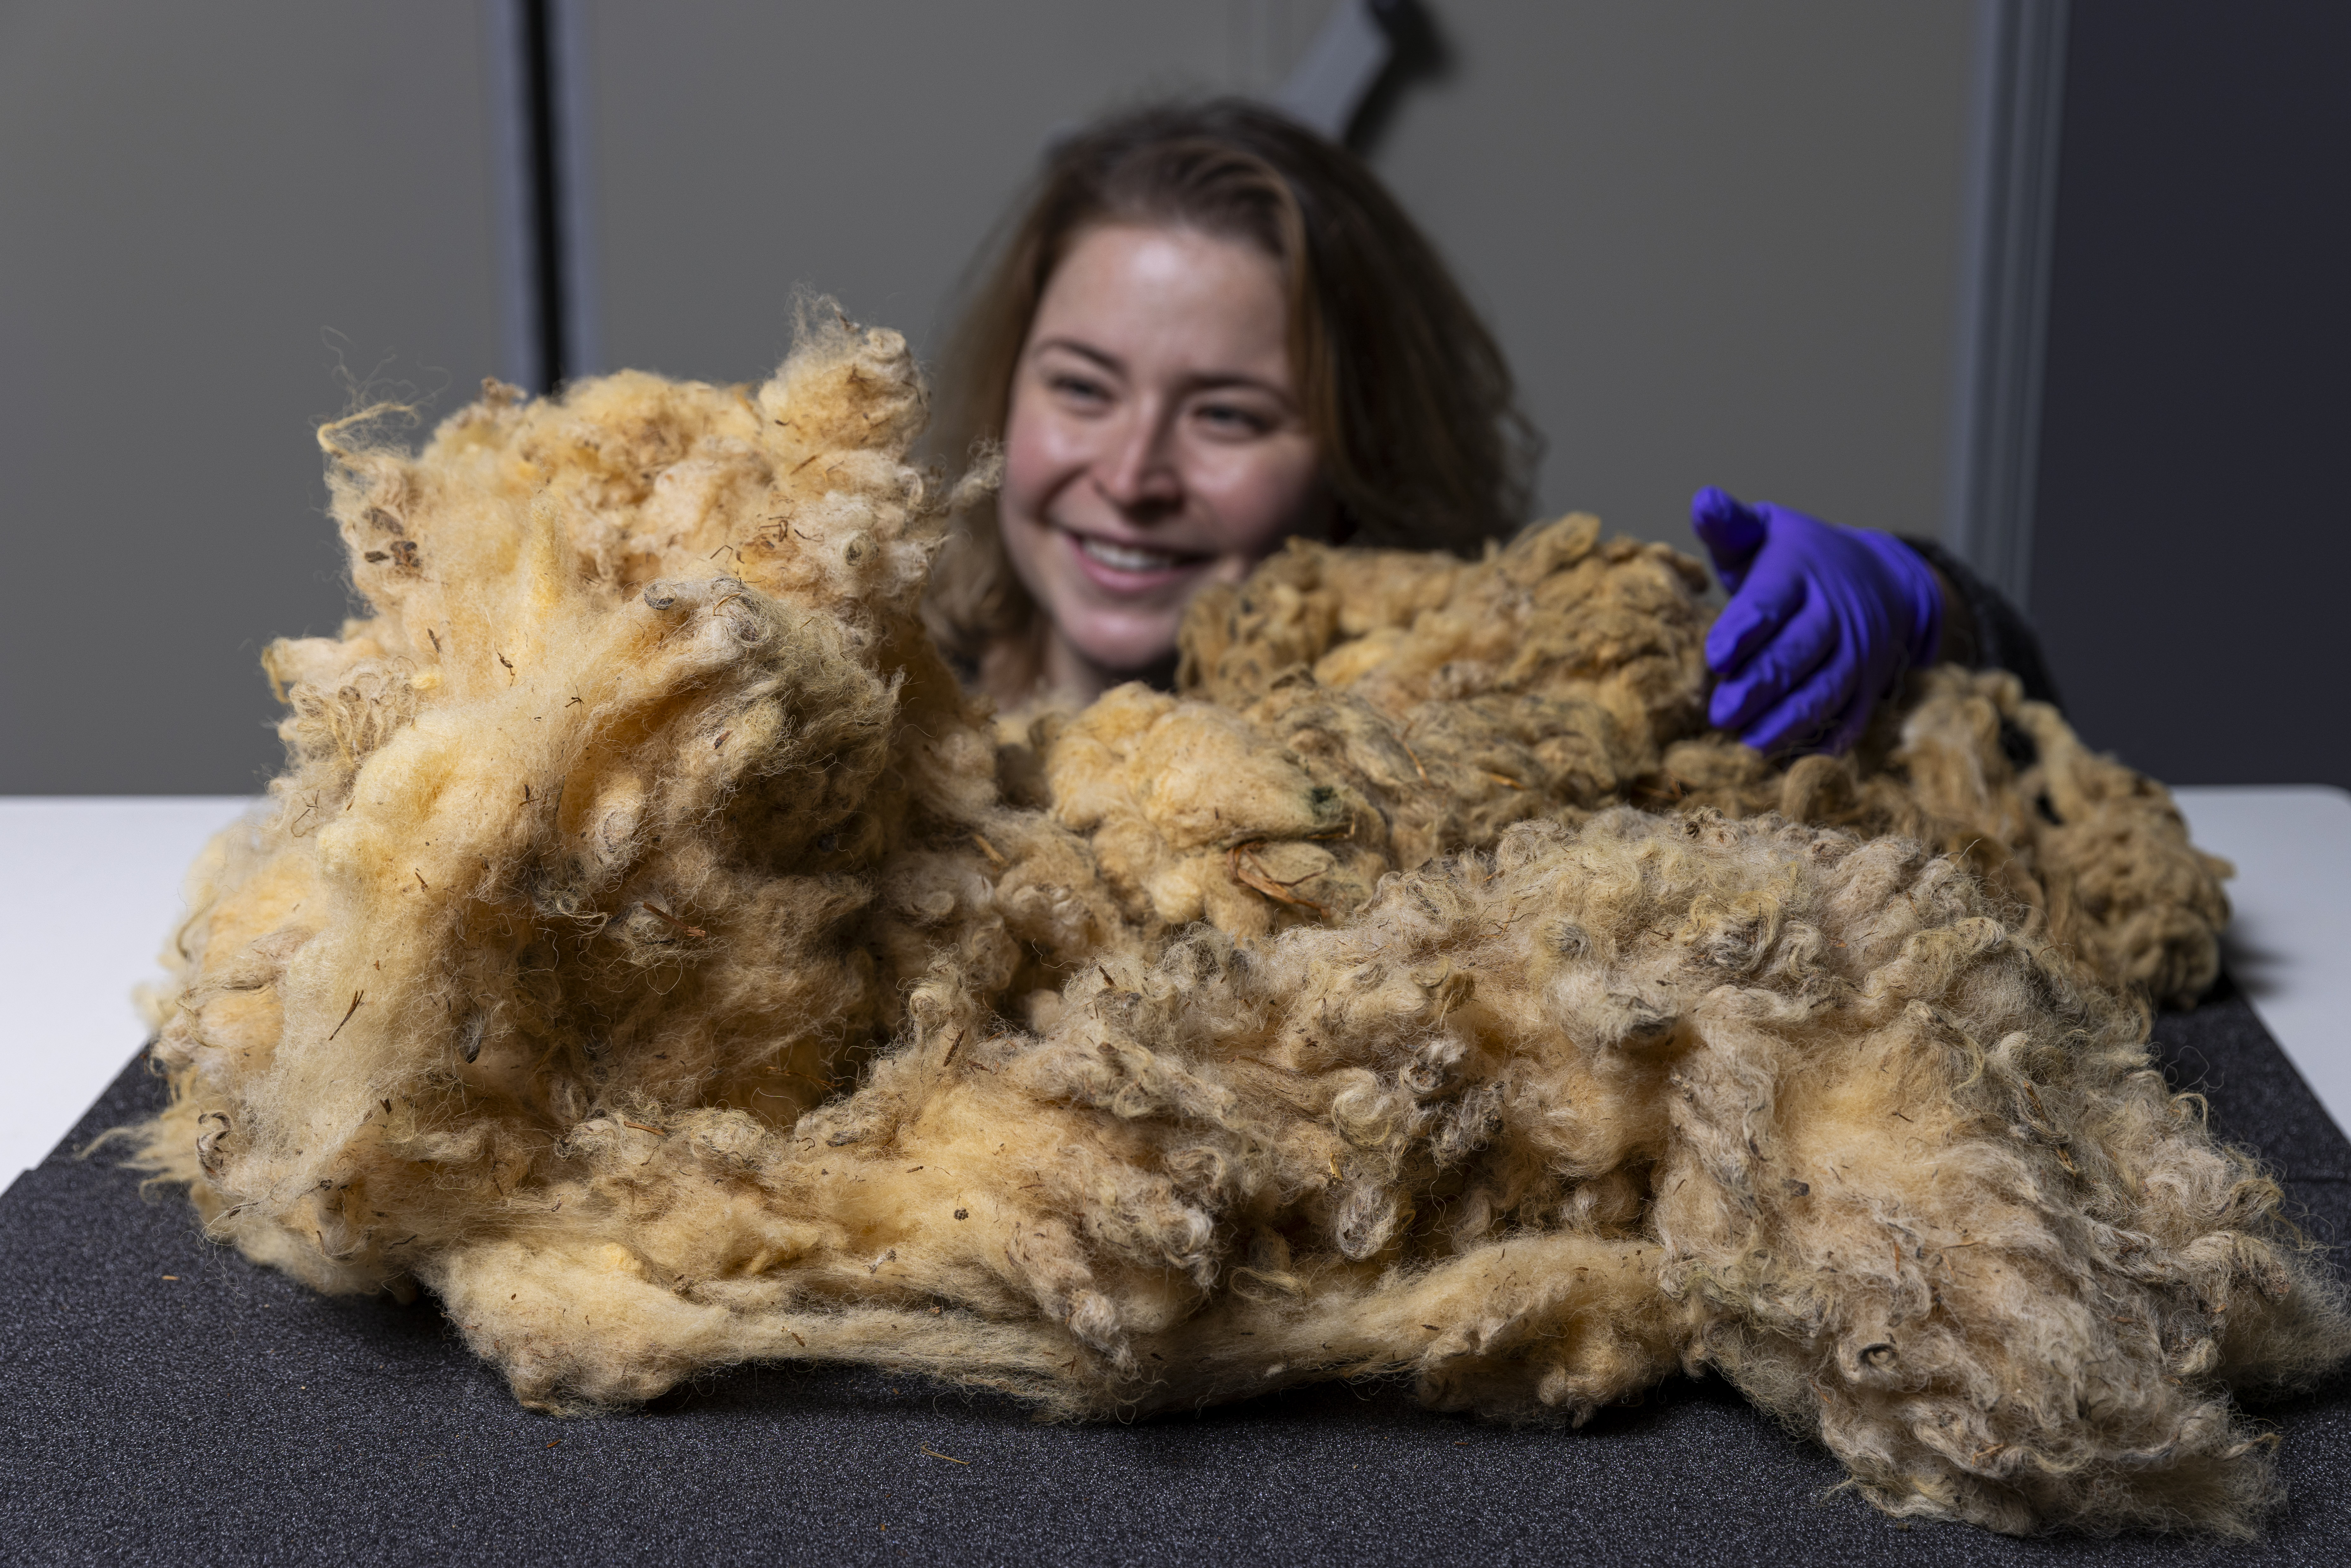 Curator Sophie Goggins with Dolly the Sheep fleece. Credit: Duncan McGlynn 